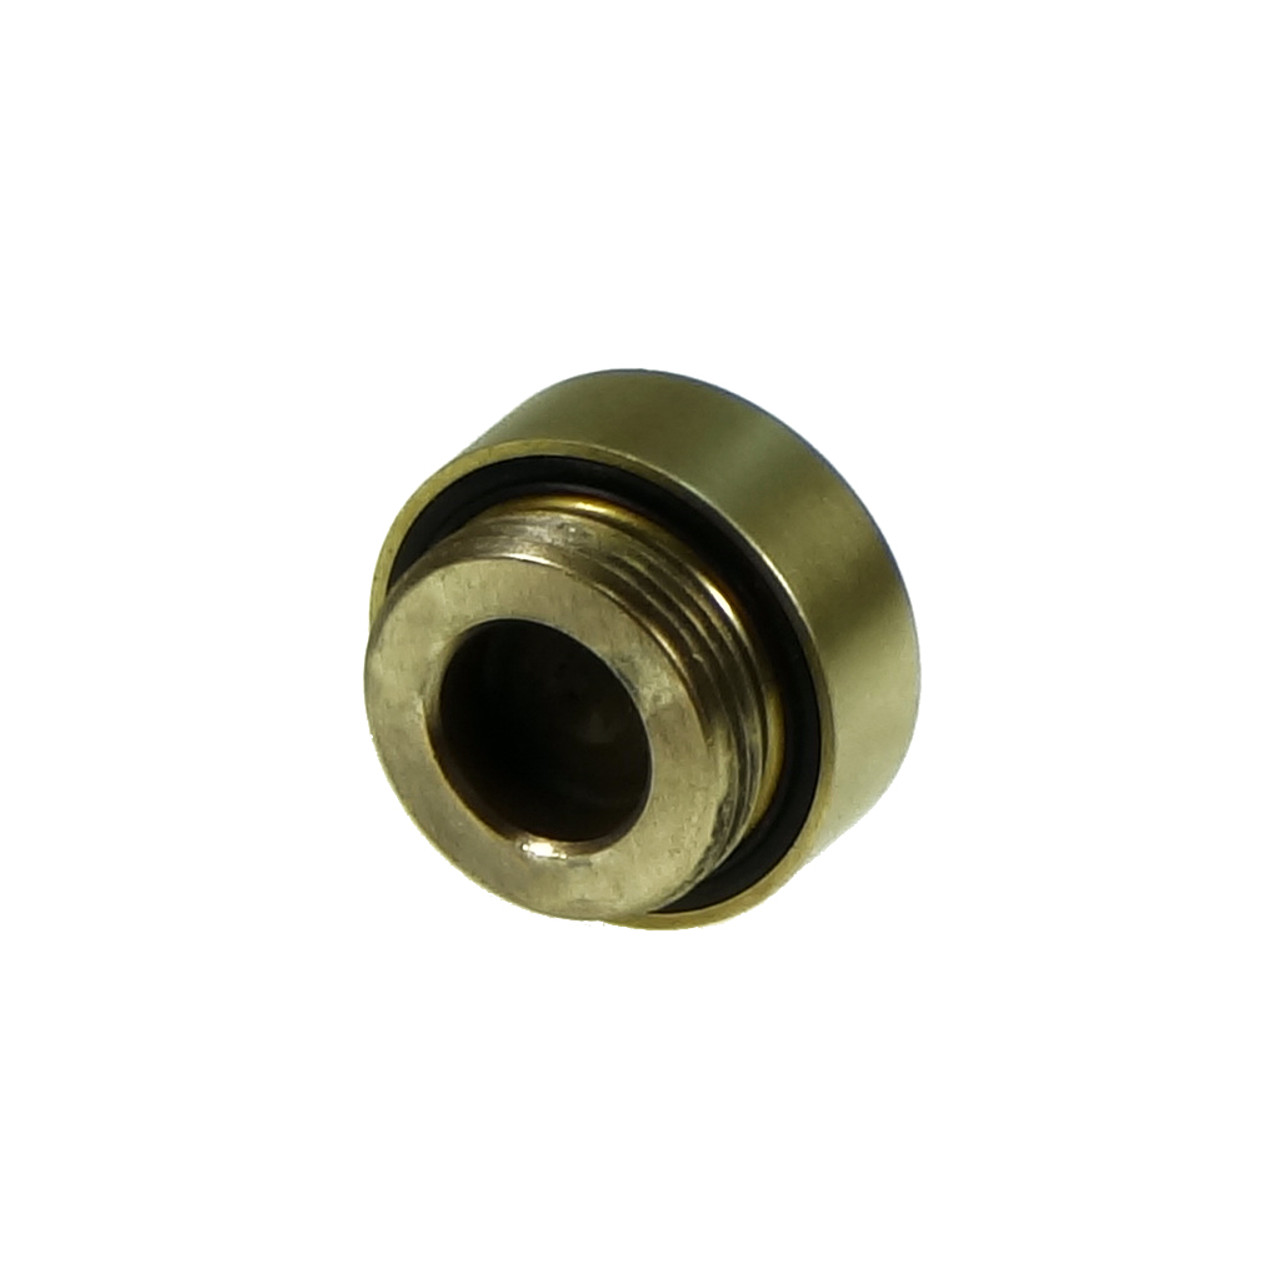 Replacement  Brass Plug with Oring for all ProMist Pumps